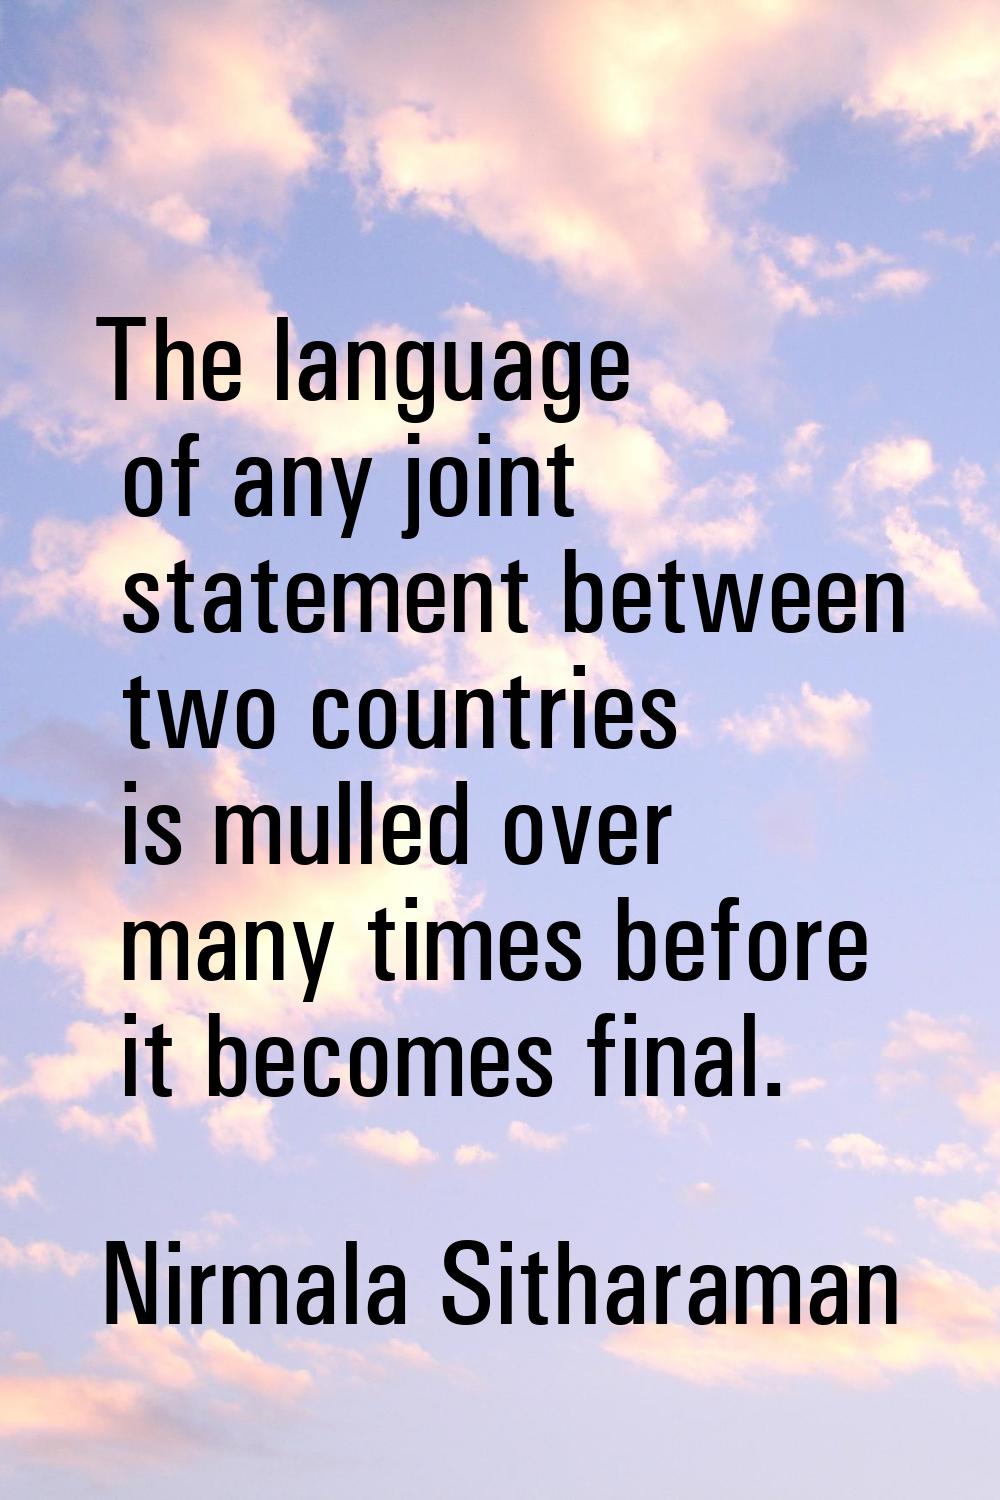 The language of any joint statement between two countries is mulled over many times before it becom